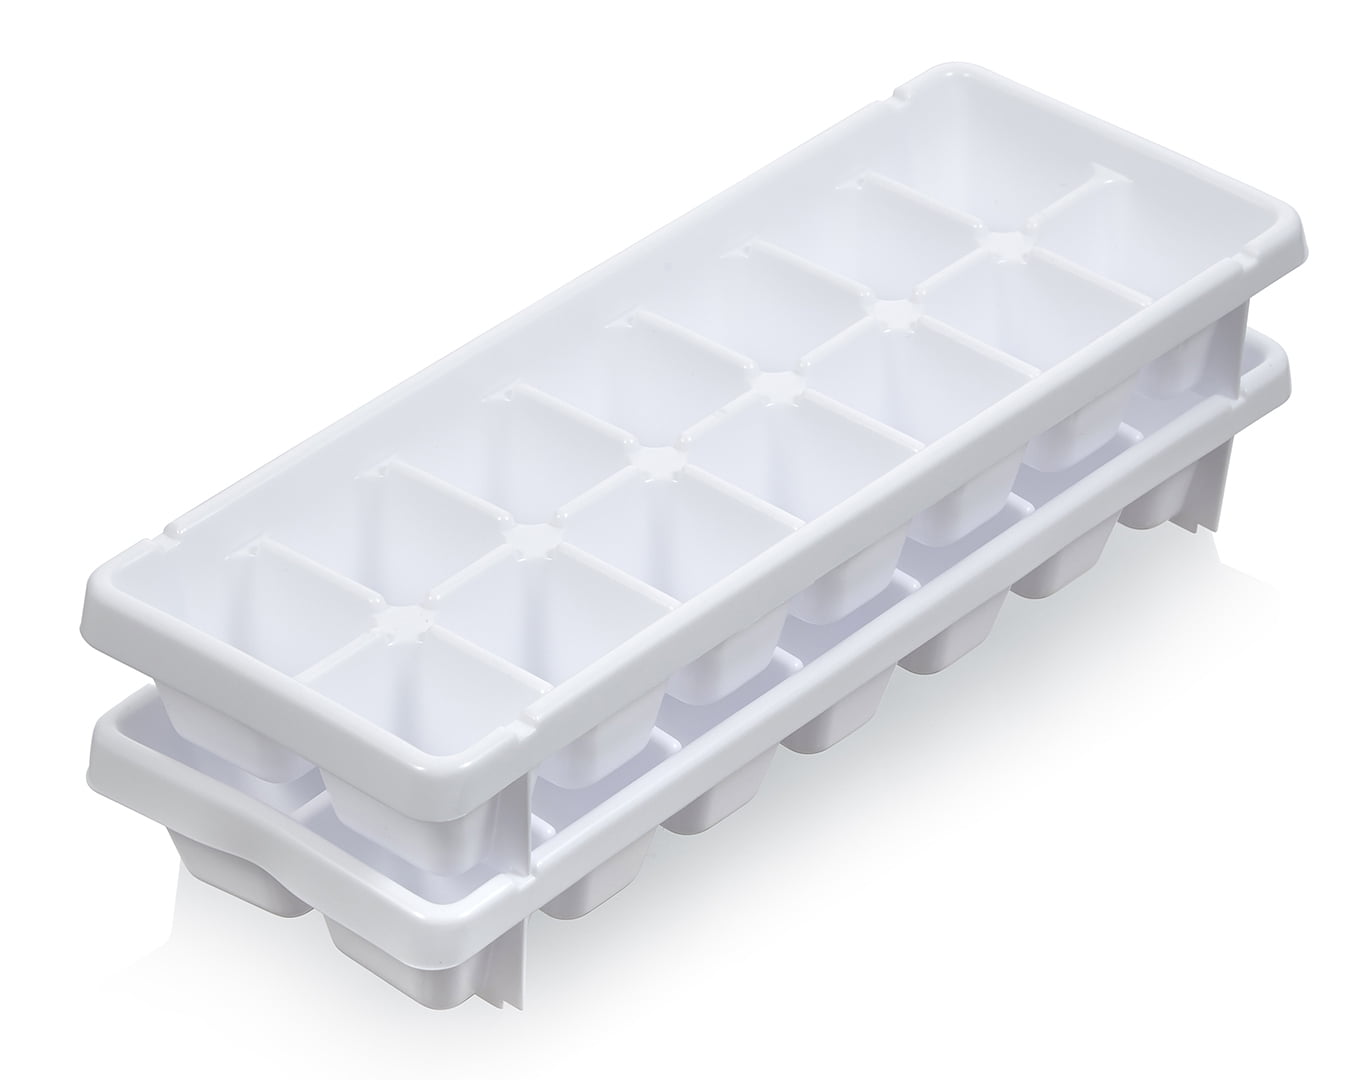 Mainstays Eezy Out Ice Cube Maker Tray - White Plastic